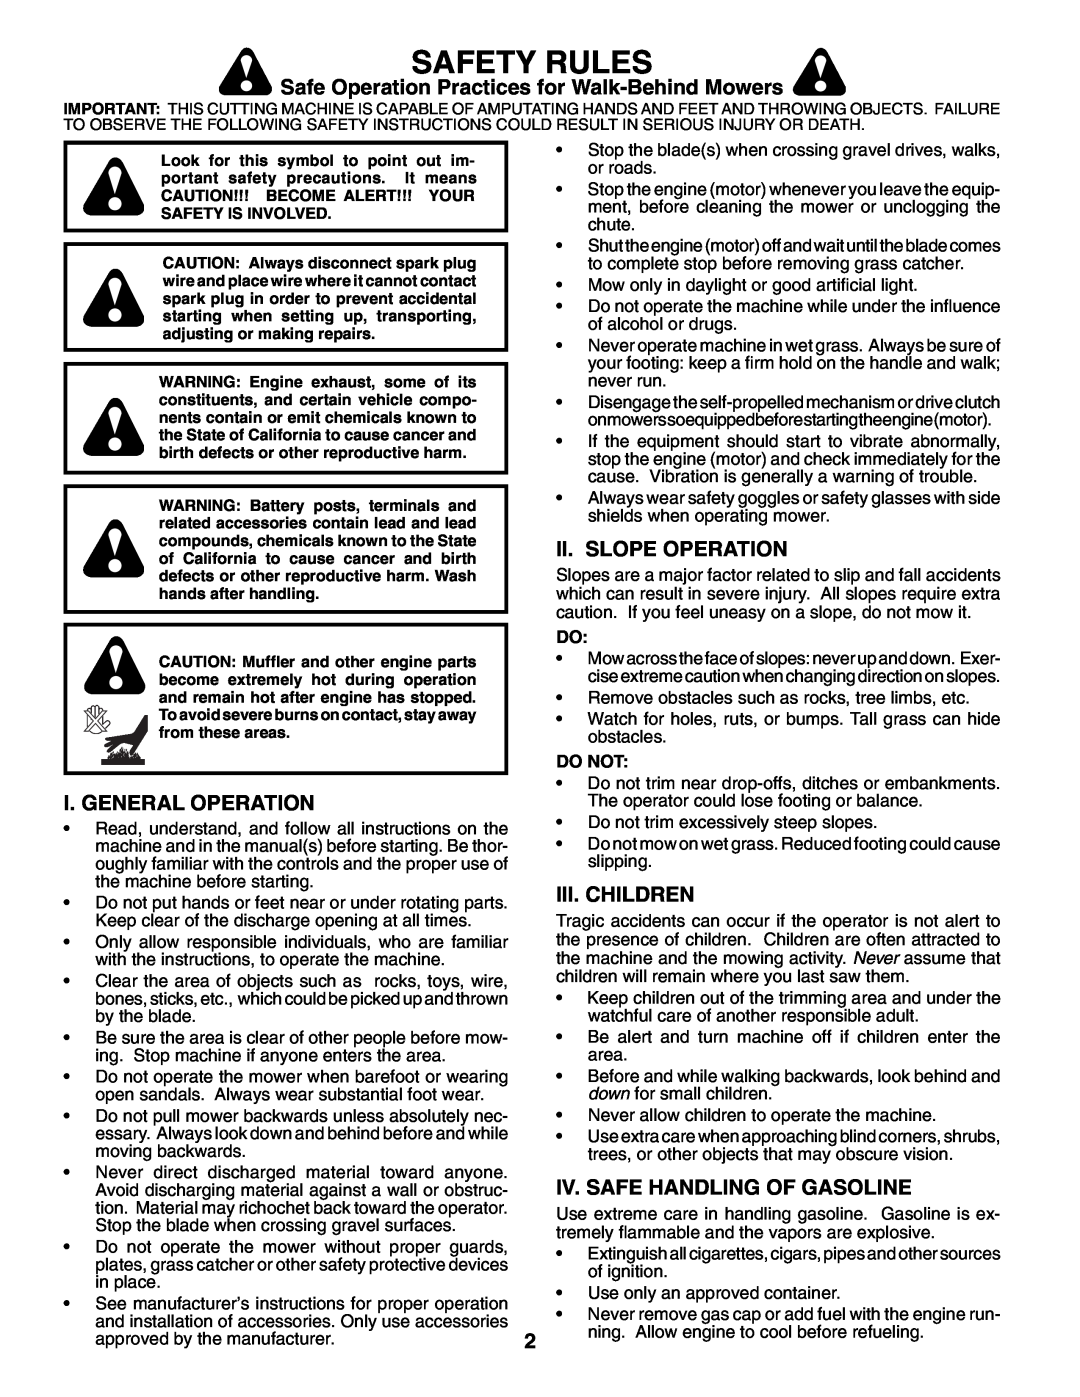 Husqvarna 62522SH Safety Rules, Safe Operation Practices for Walk-BehindMowers, Ii. Slope Operation, I. General Operation 